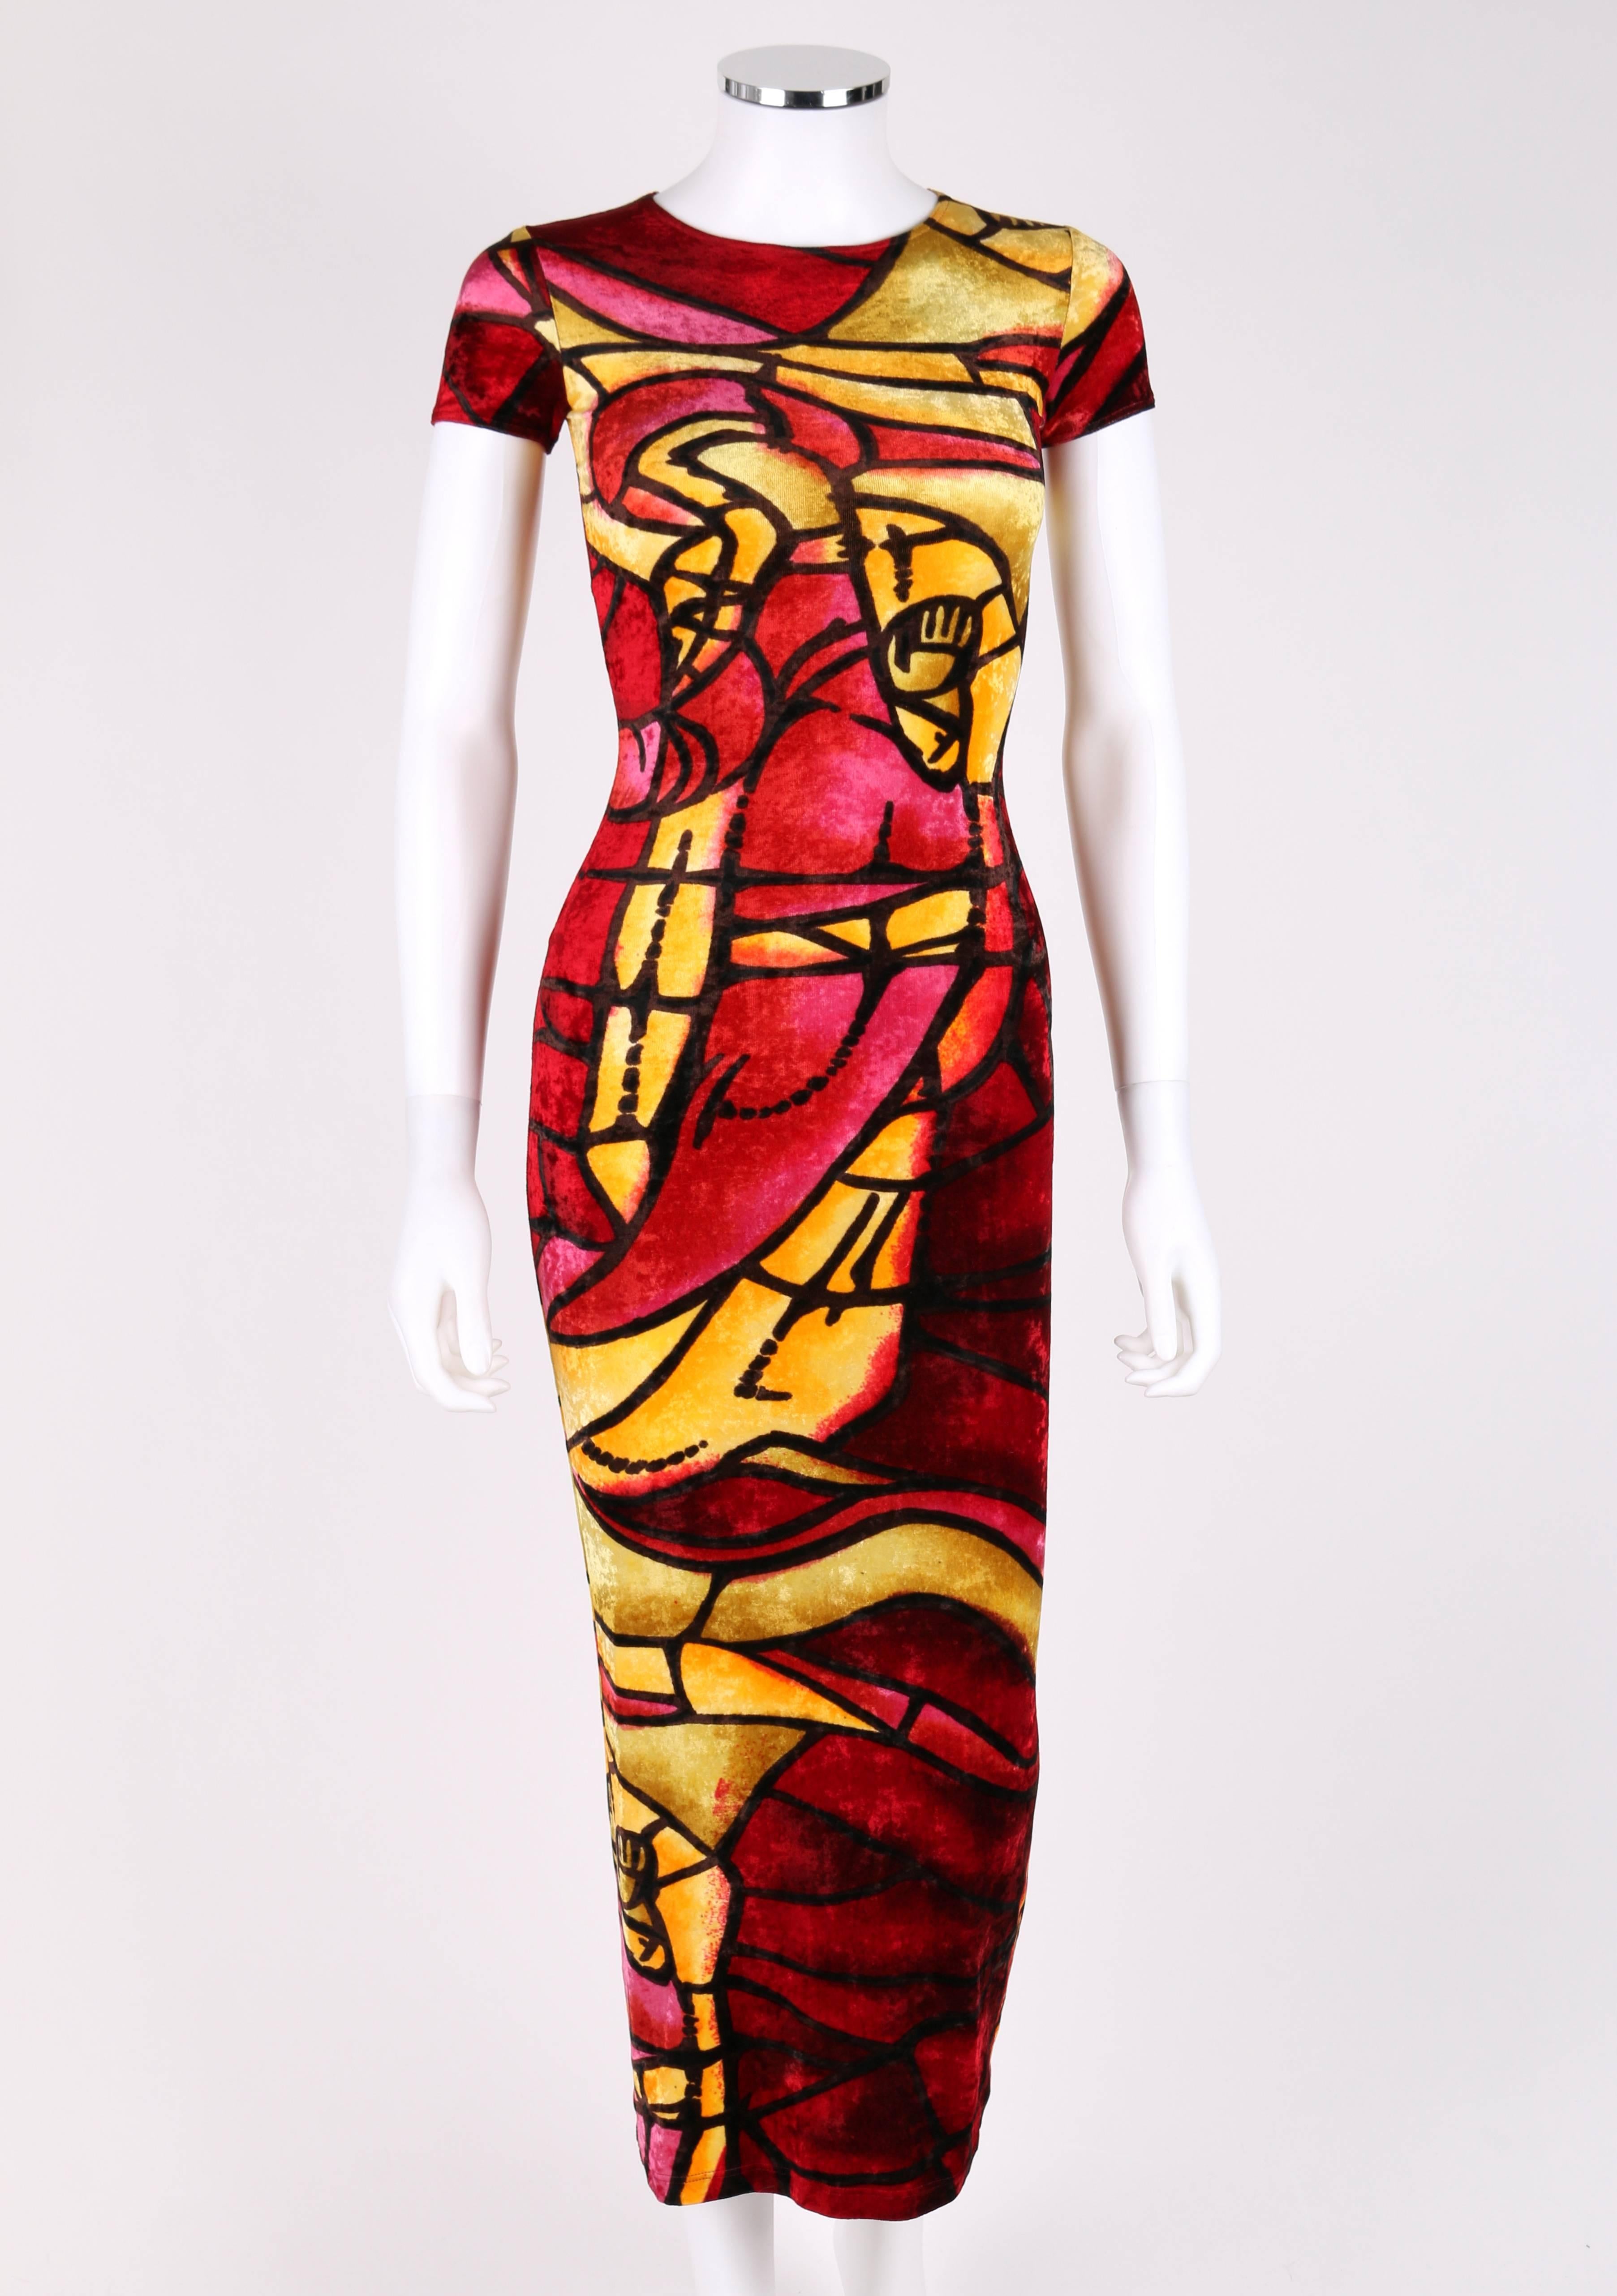 Christian Dior c.late 1990's designed by John Galliano multicolored stained glass print crushed velvet dress. Round neckline. Short sleeves. Bodycon midi style. All over stained glass print in shades of yellow, pink and deep red. Stretch silk